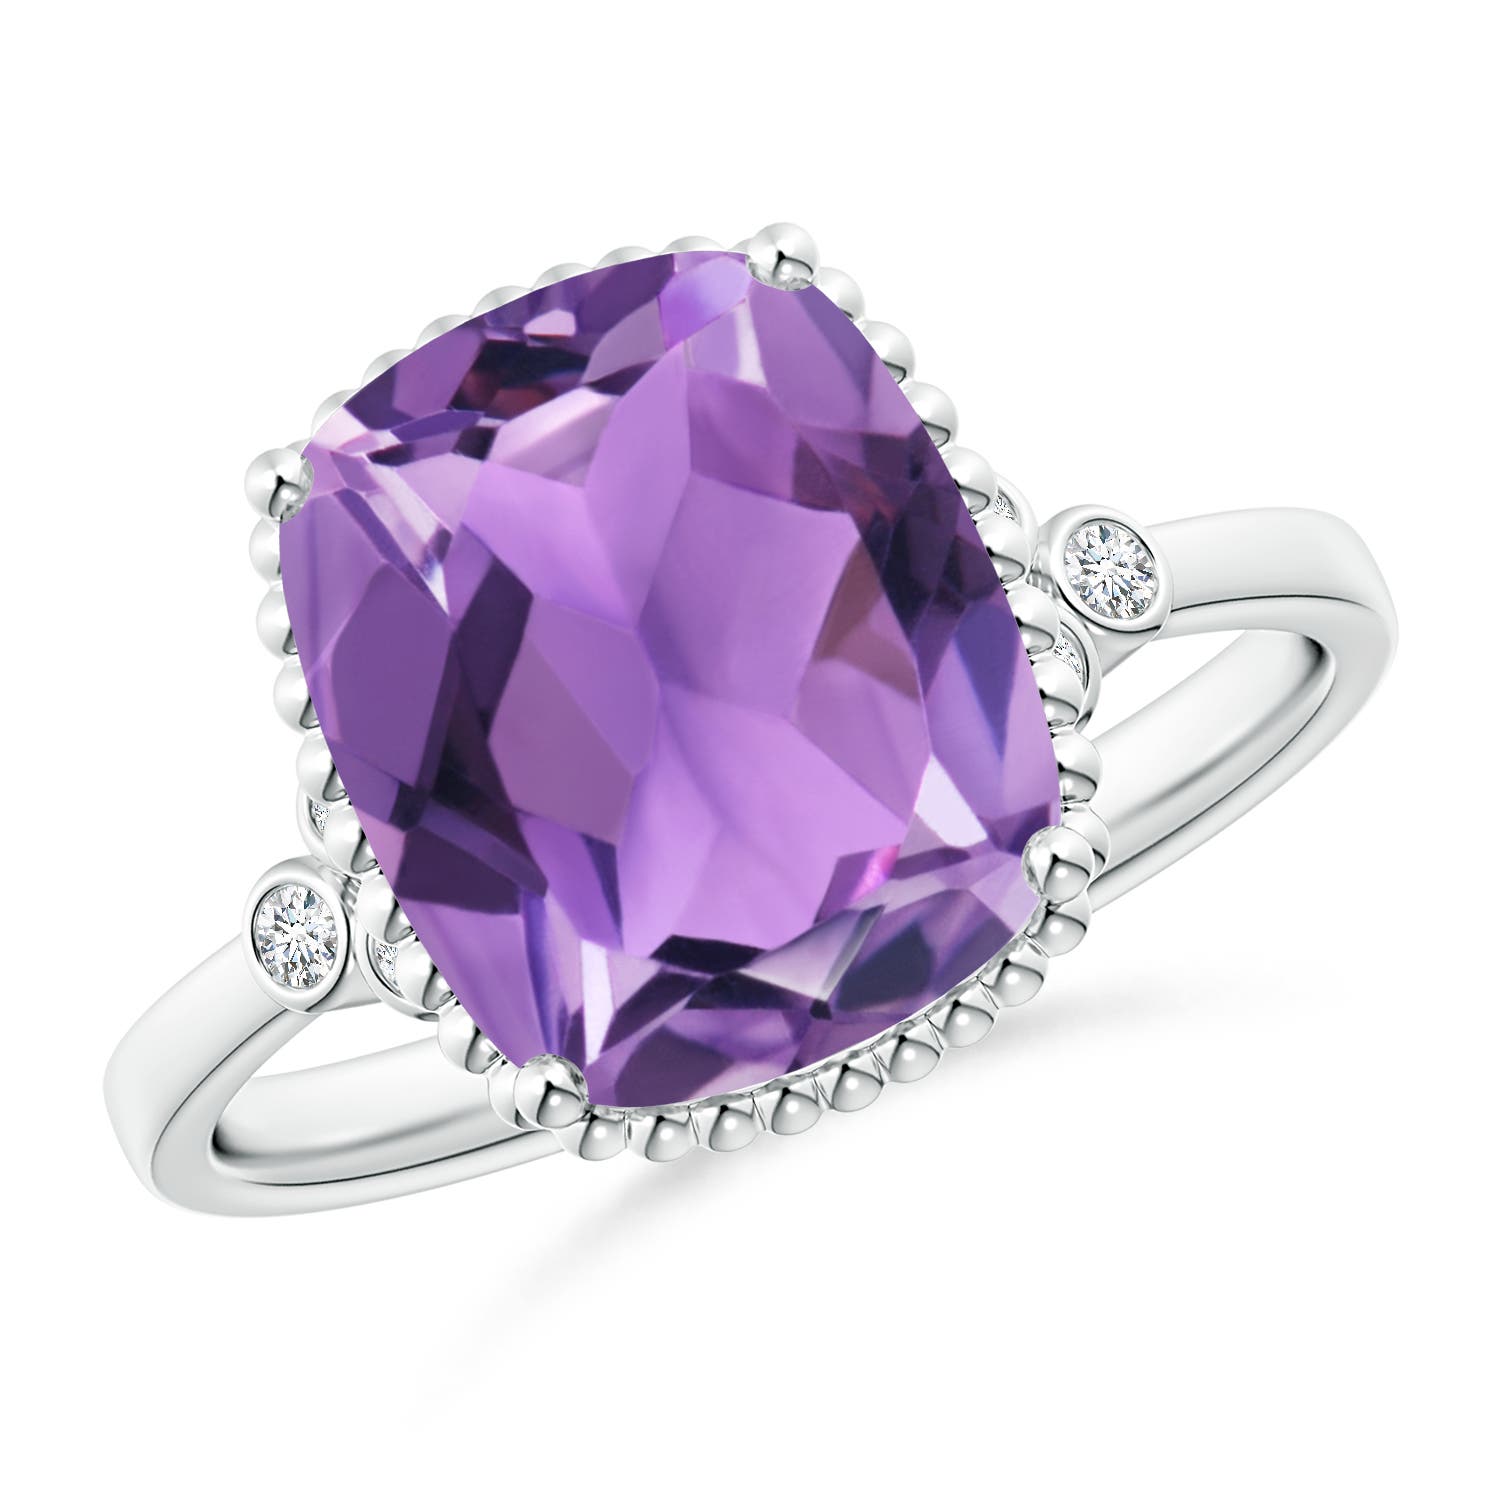 AA - Amethyst / 3.58 CT / 14 KT White Gold